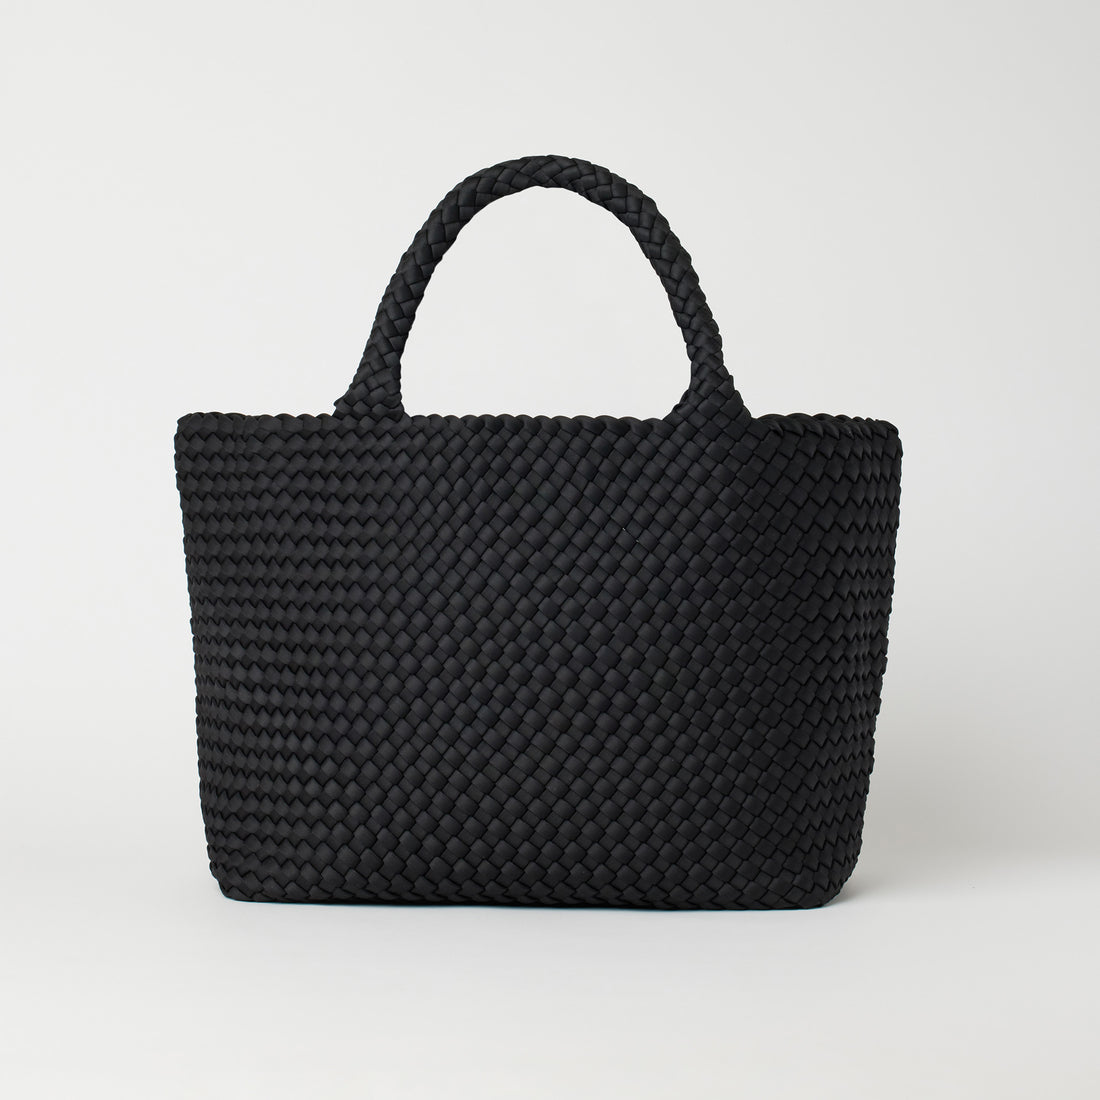 Andreina Bags Siempre tote bag in black colour. Large size yet lightweight. Handmade, interlaced material, synthetic material, water resistant, machine washable. Designed in Sydney, Australia.